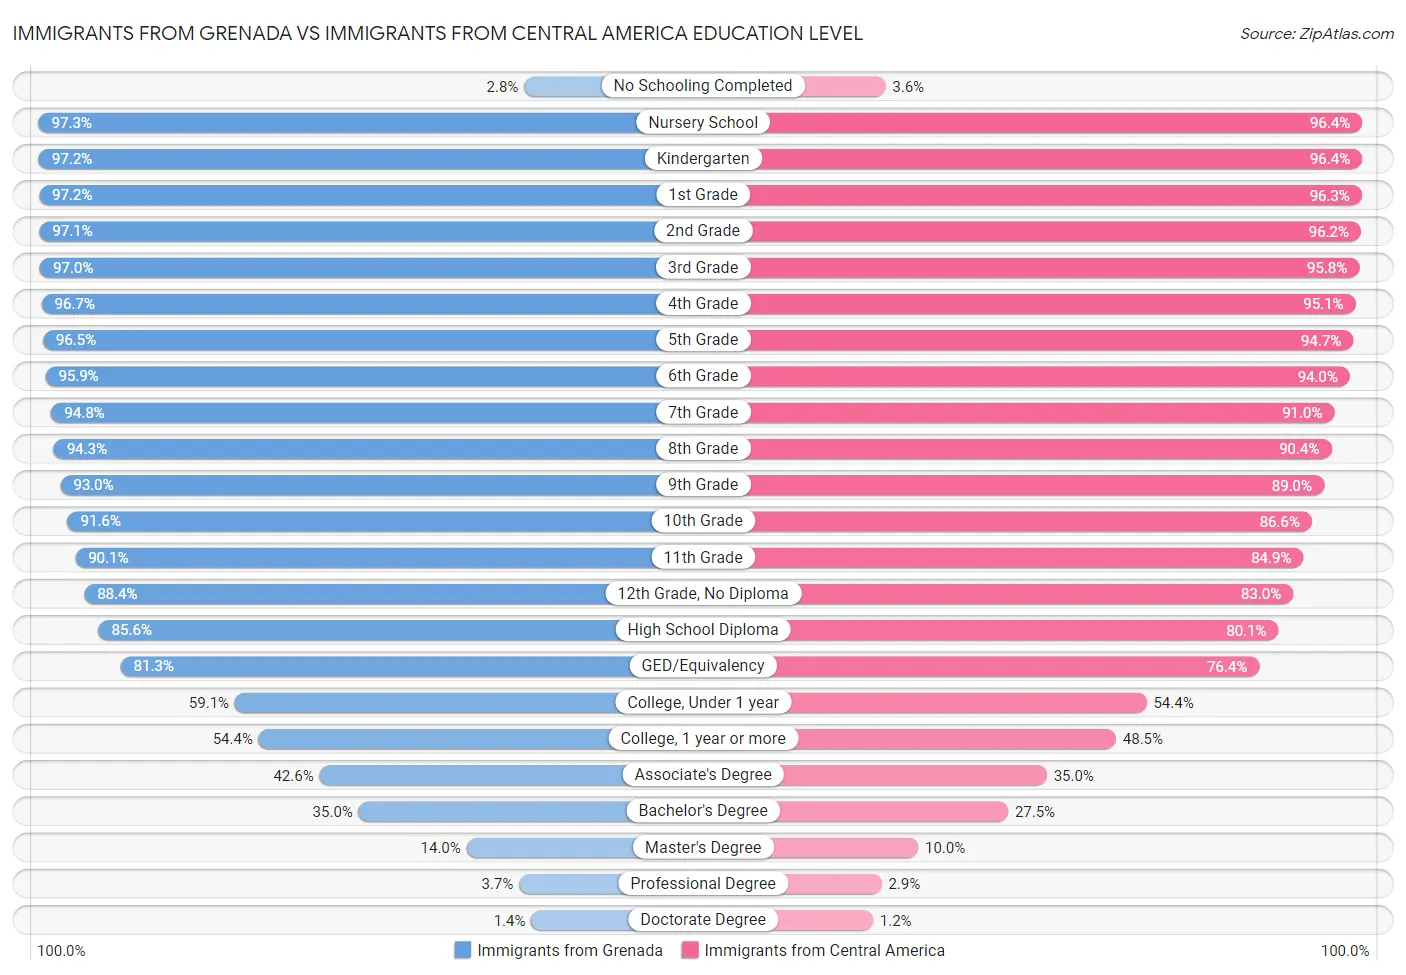 Immigrants from Grenada vs Immigrants from Central America Education Level